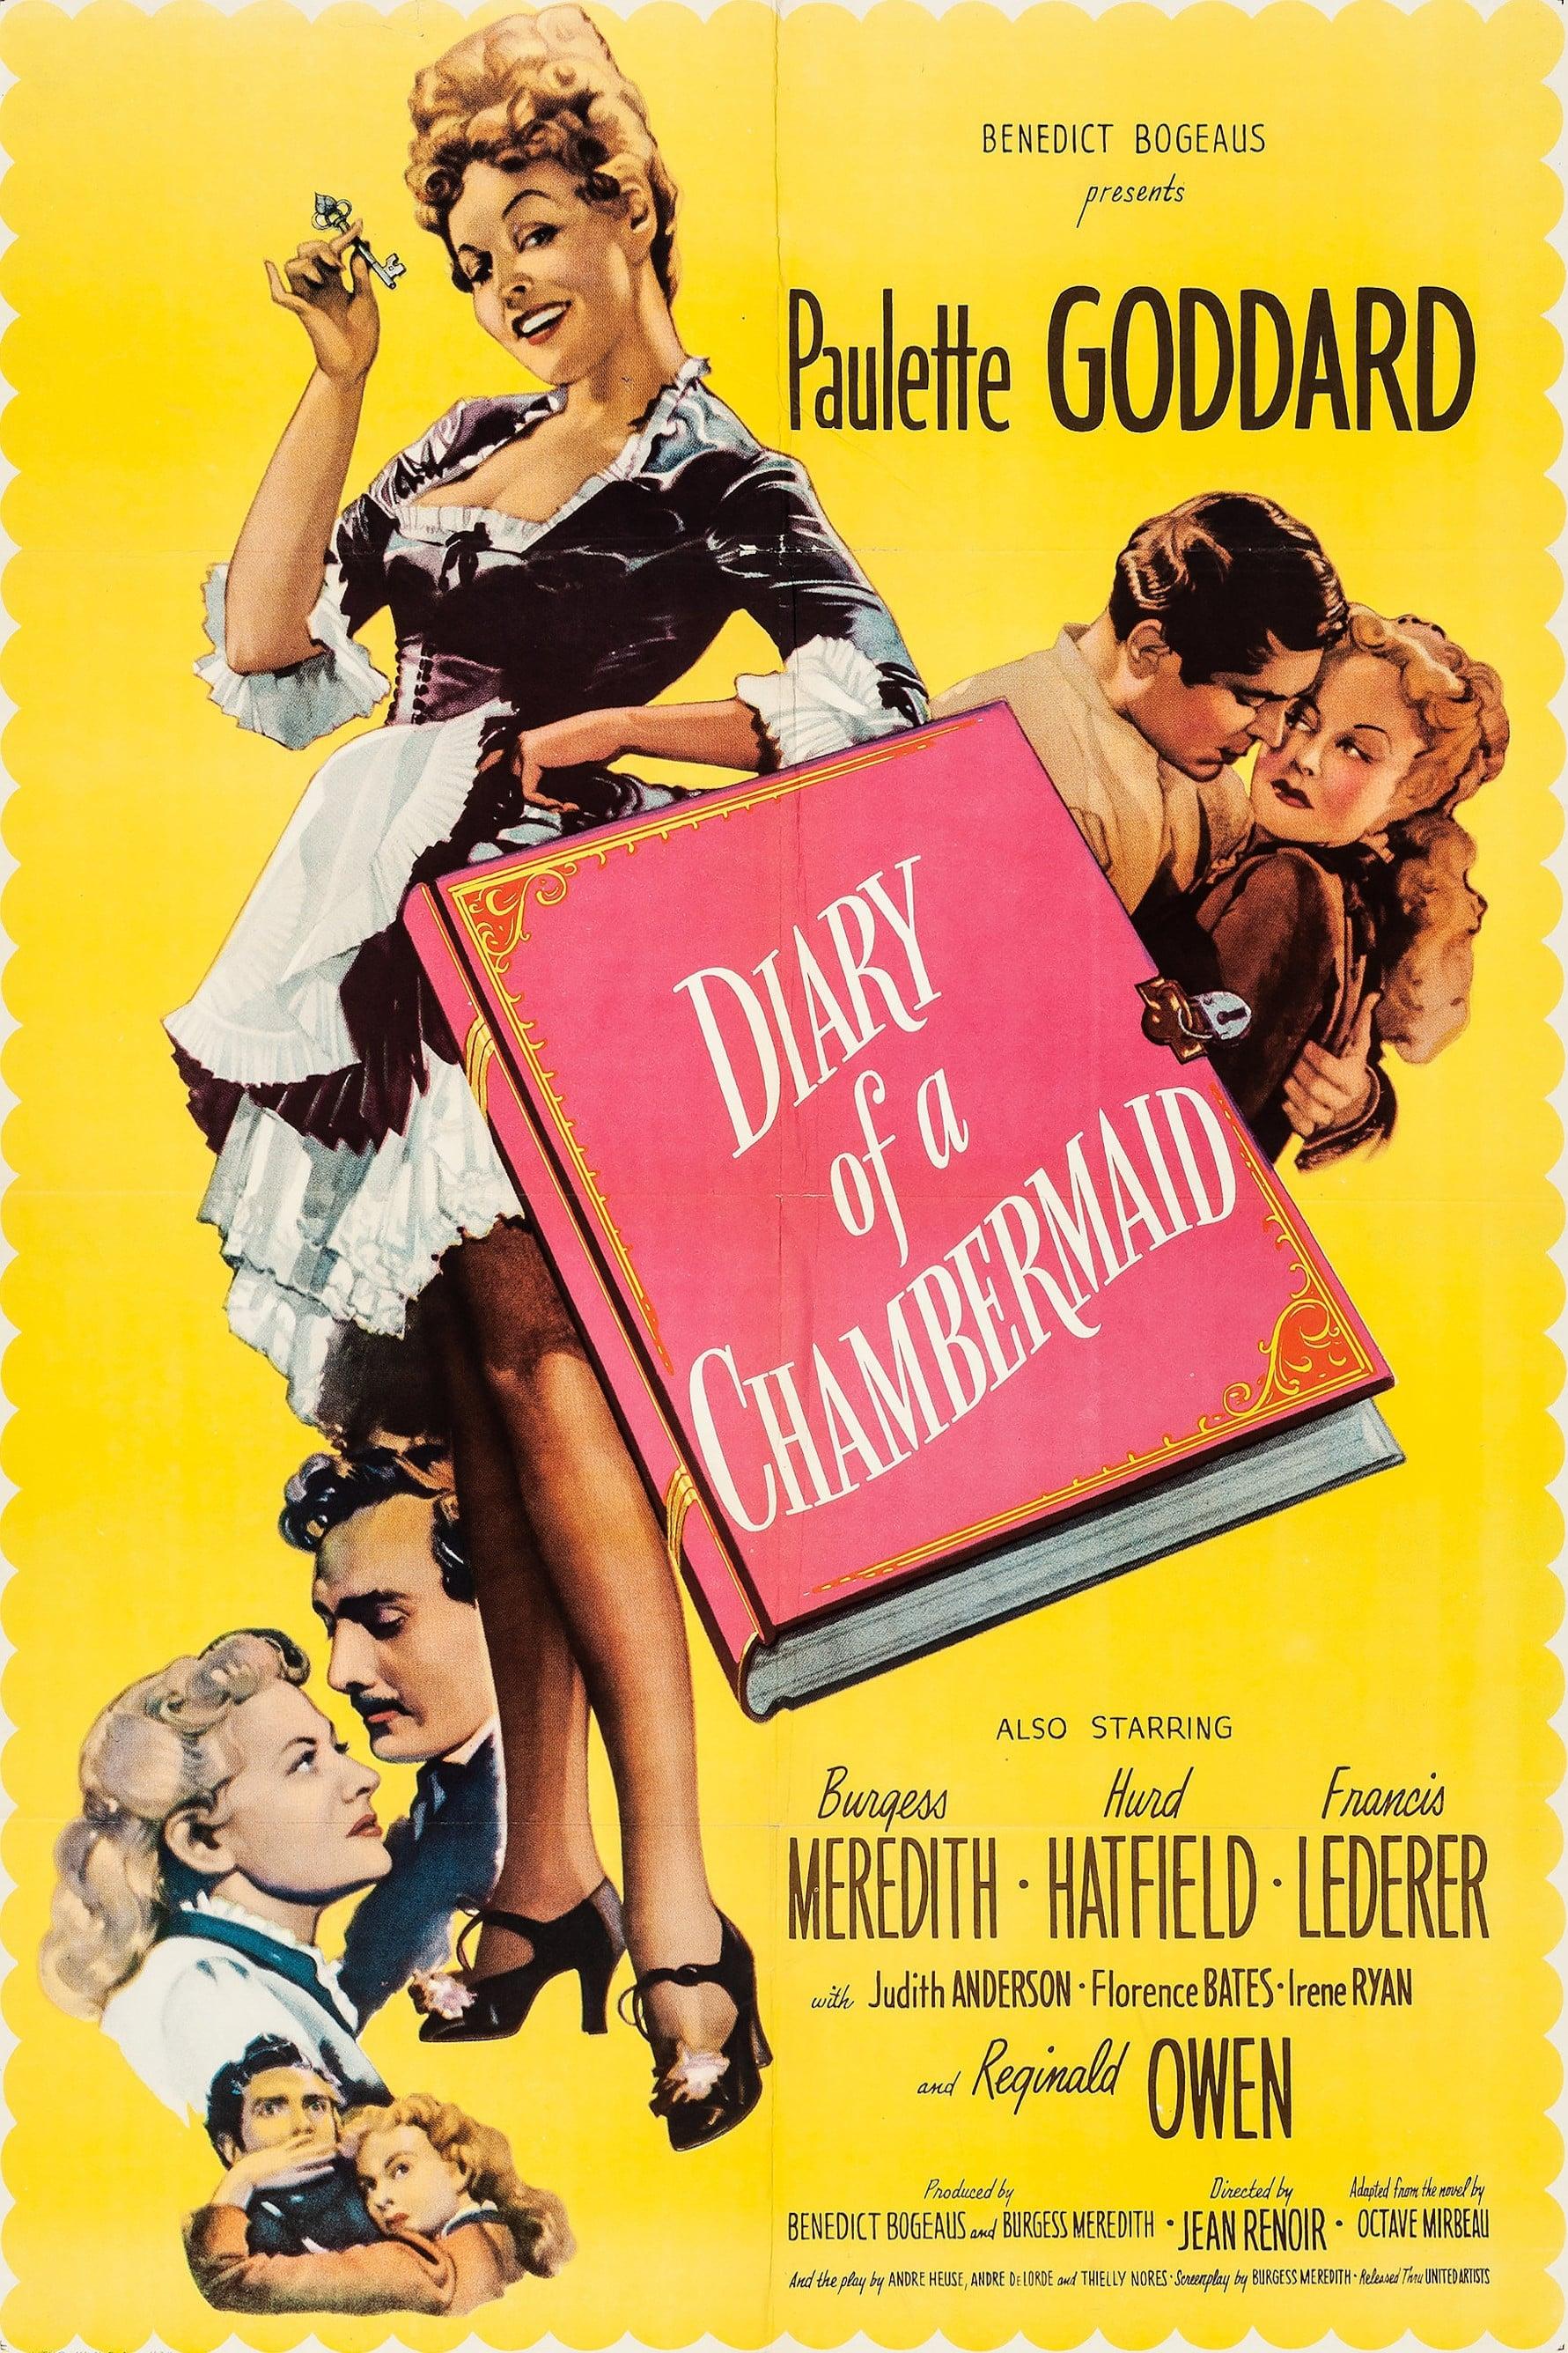 The Diary of a Chambermaid poster